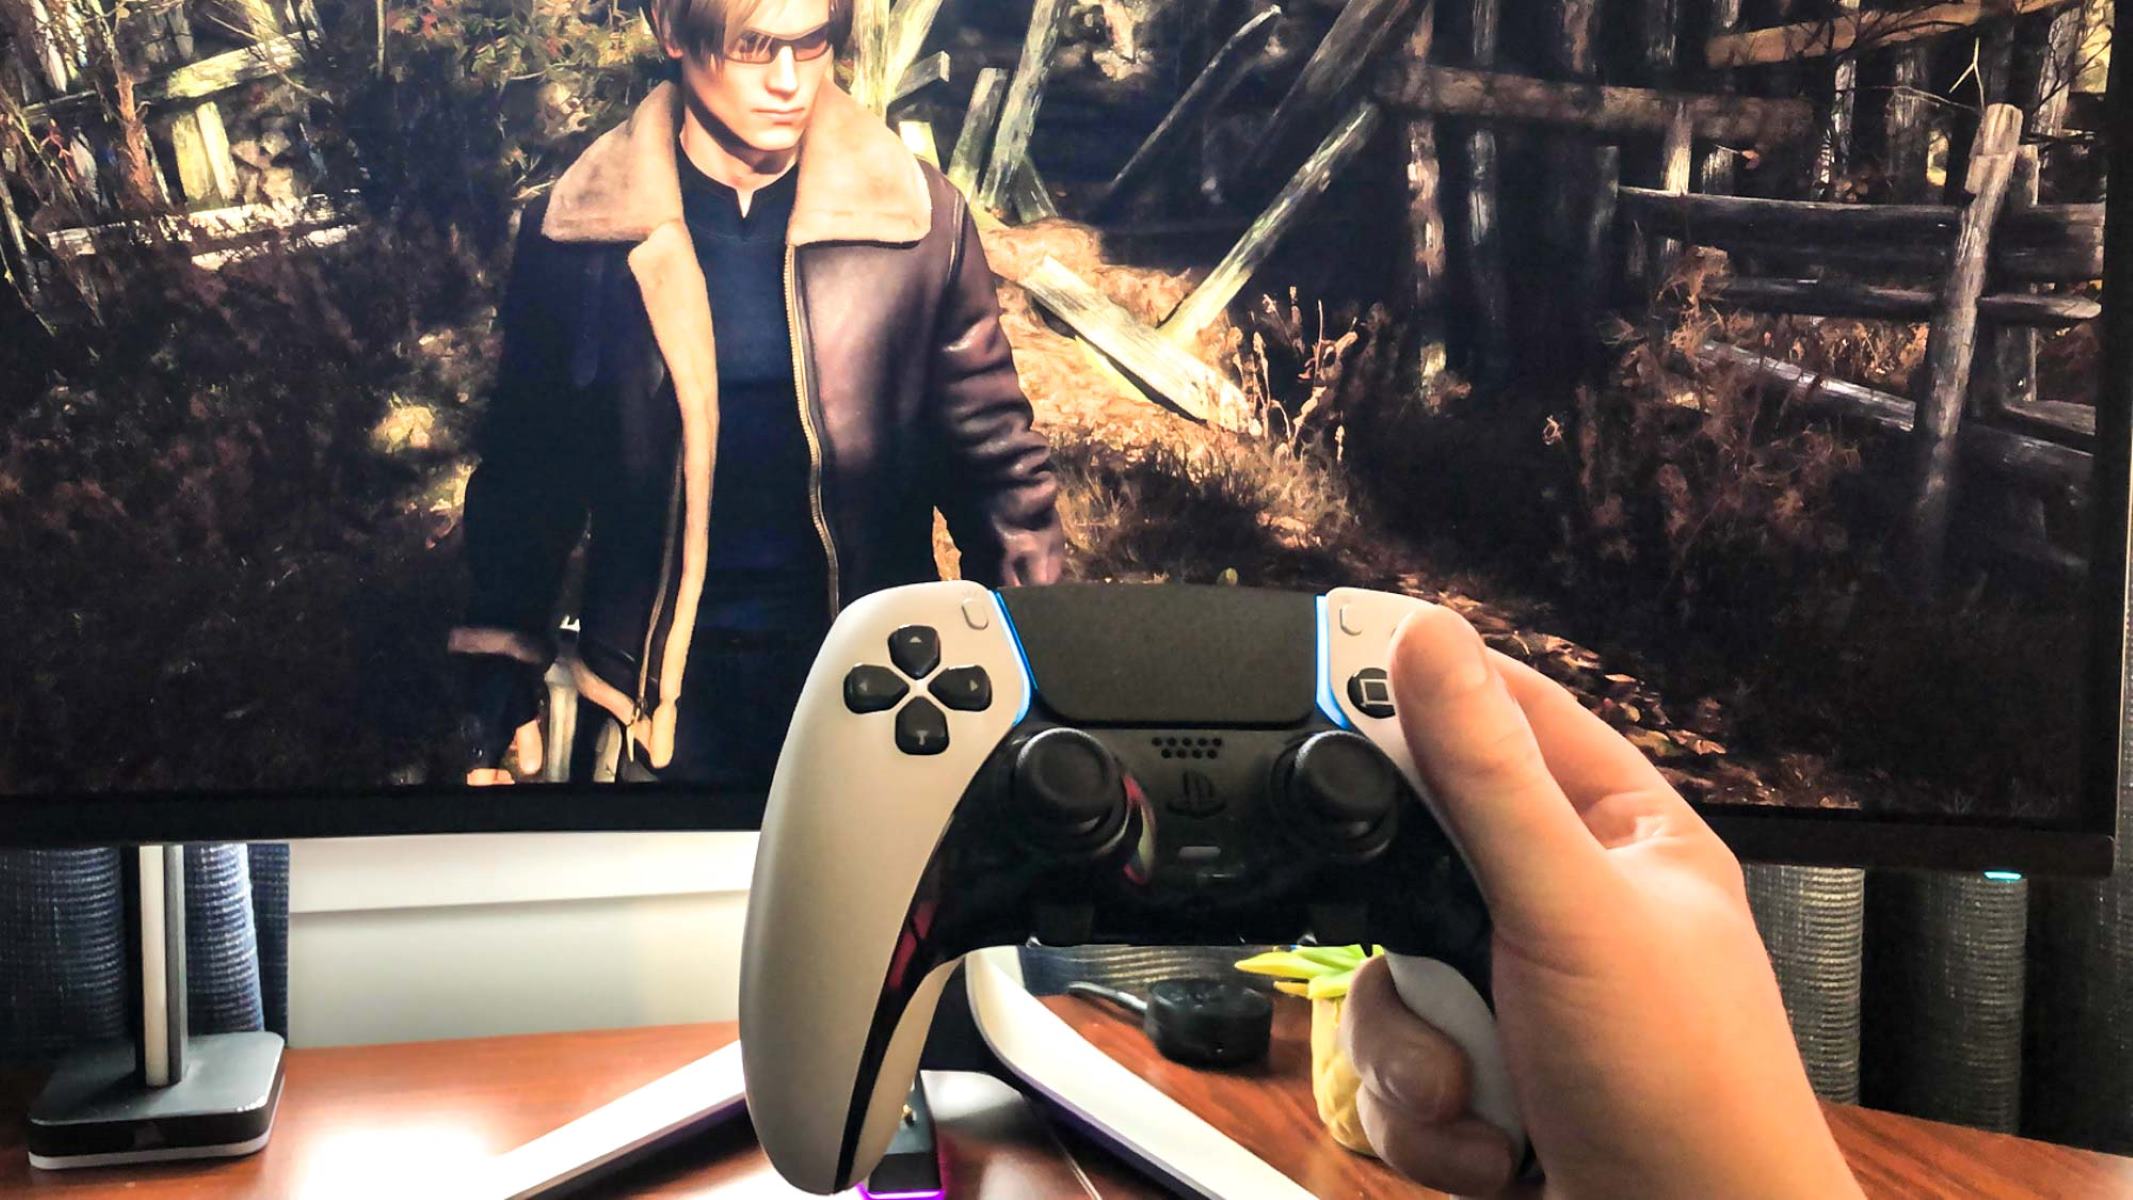 How To Calibrate A Game Controller On Windows 10